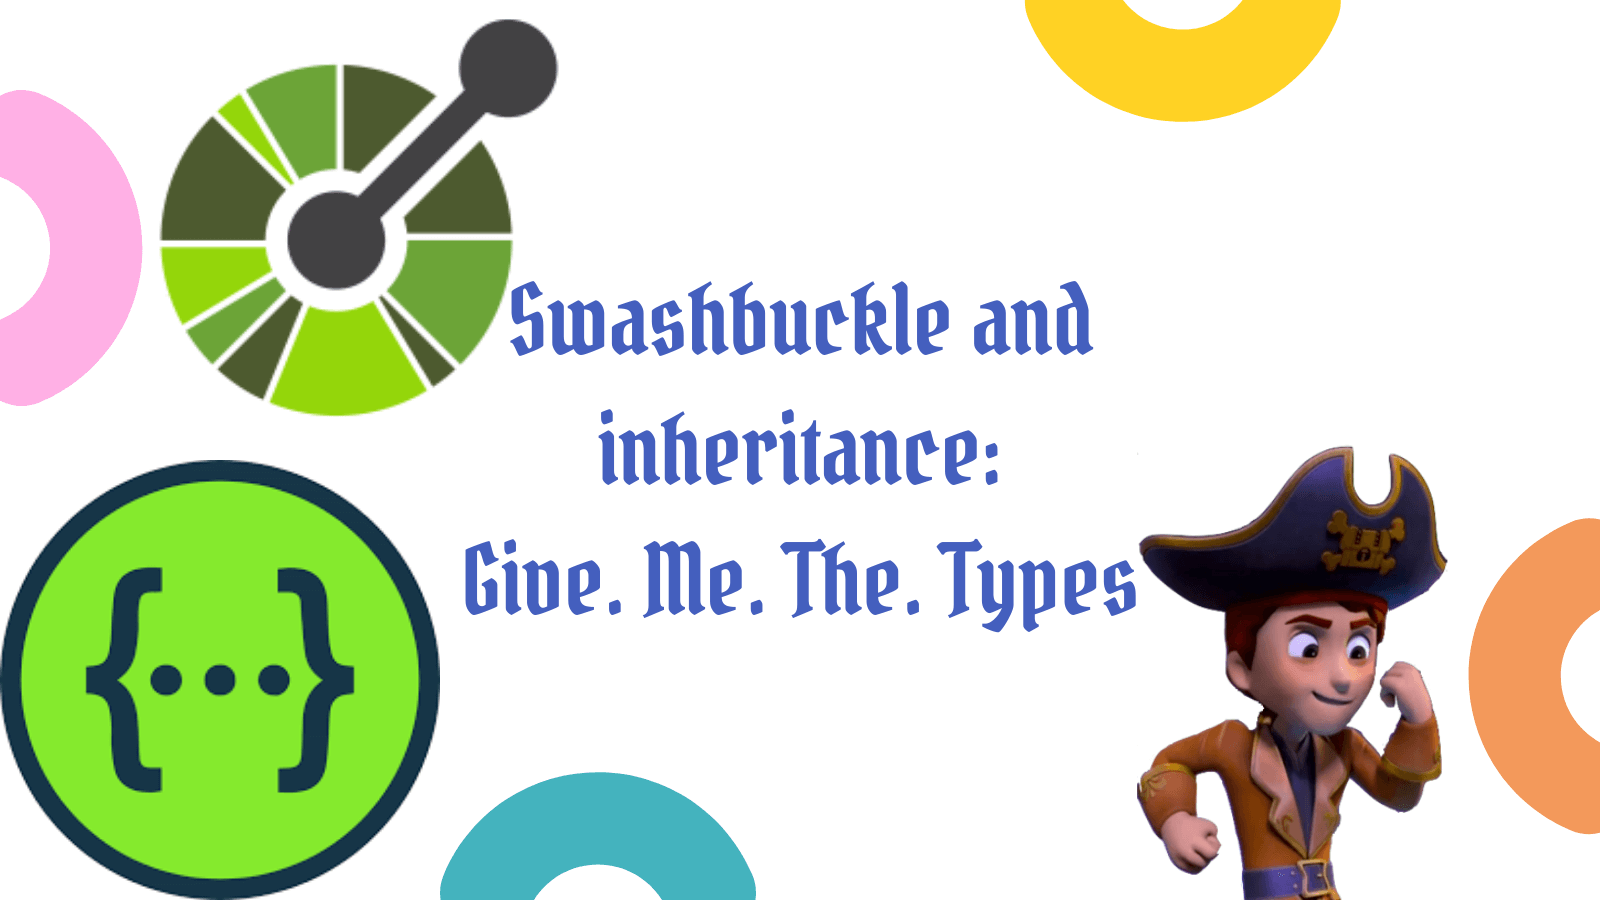 title image reading &quot;Swashbuckle and inheritance: Give. Me. The. Types&quot; with Sid Swashbuckle the Pirate and Open API logos